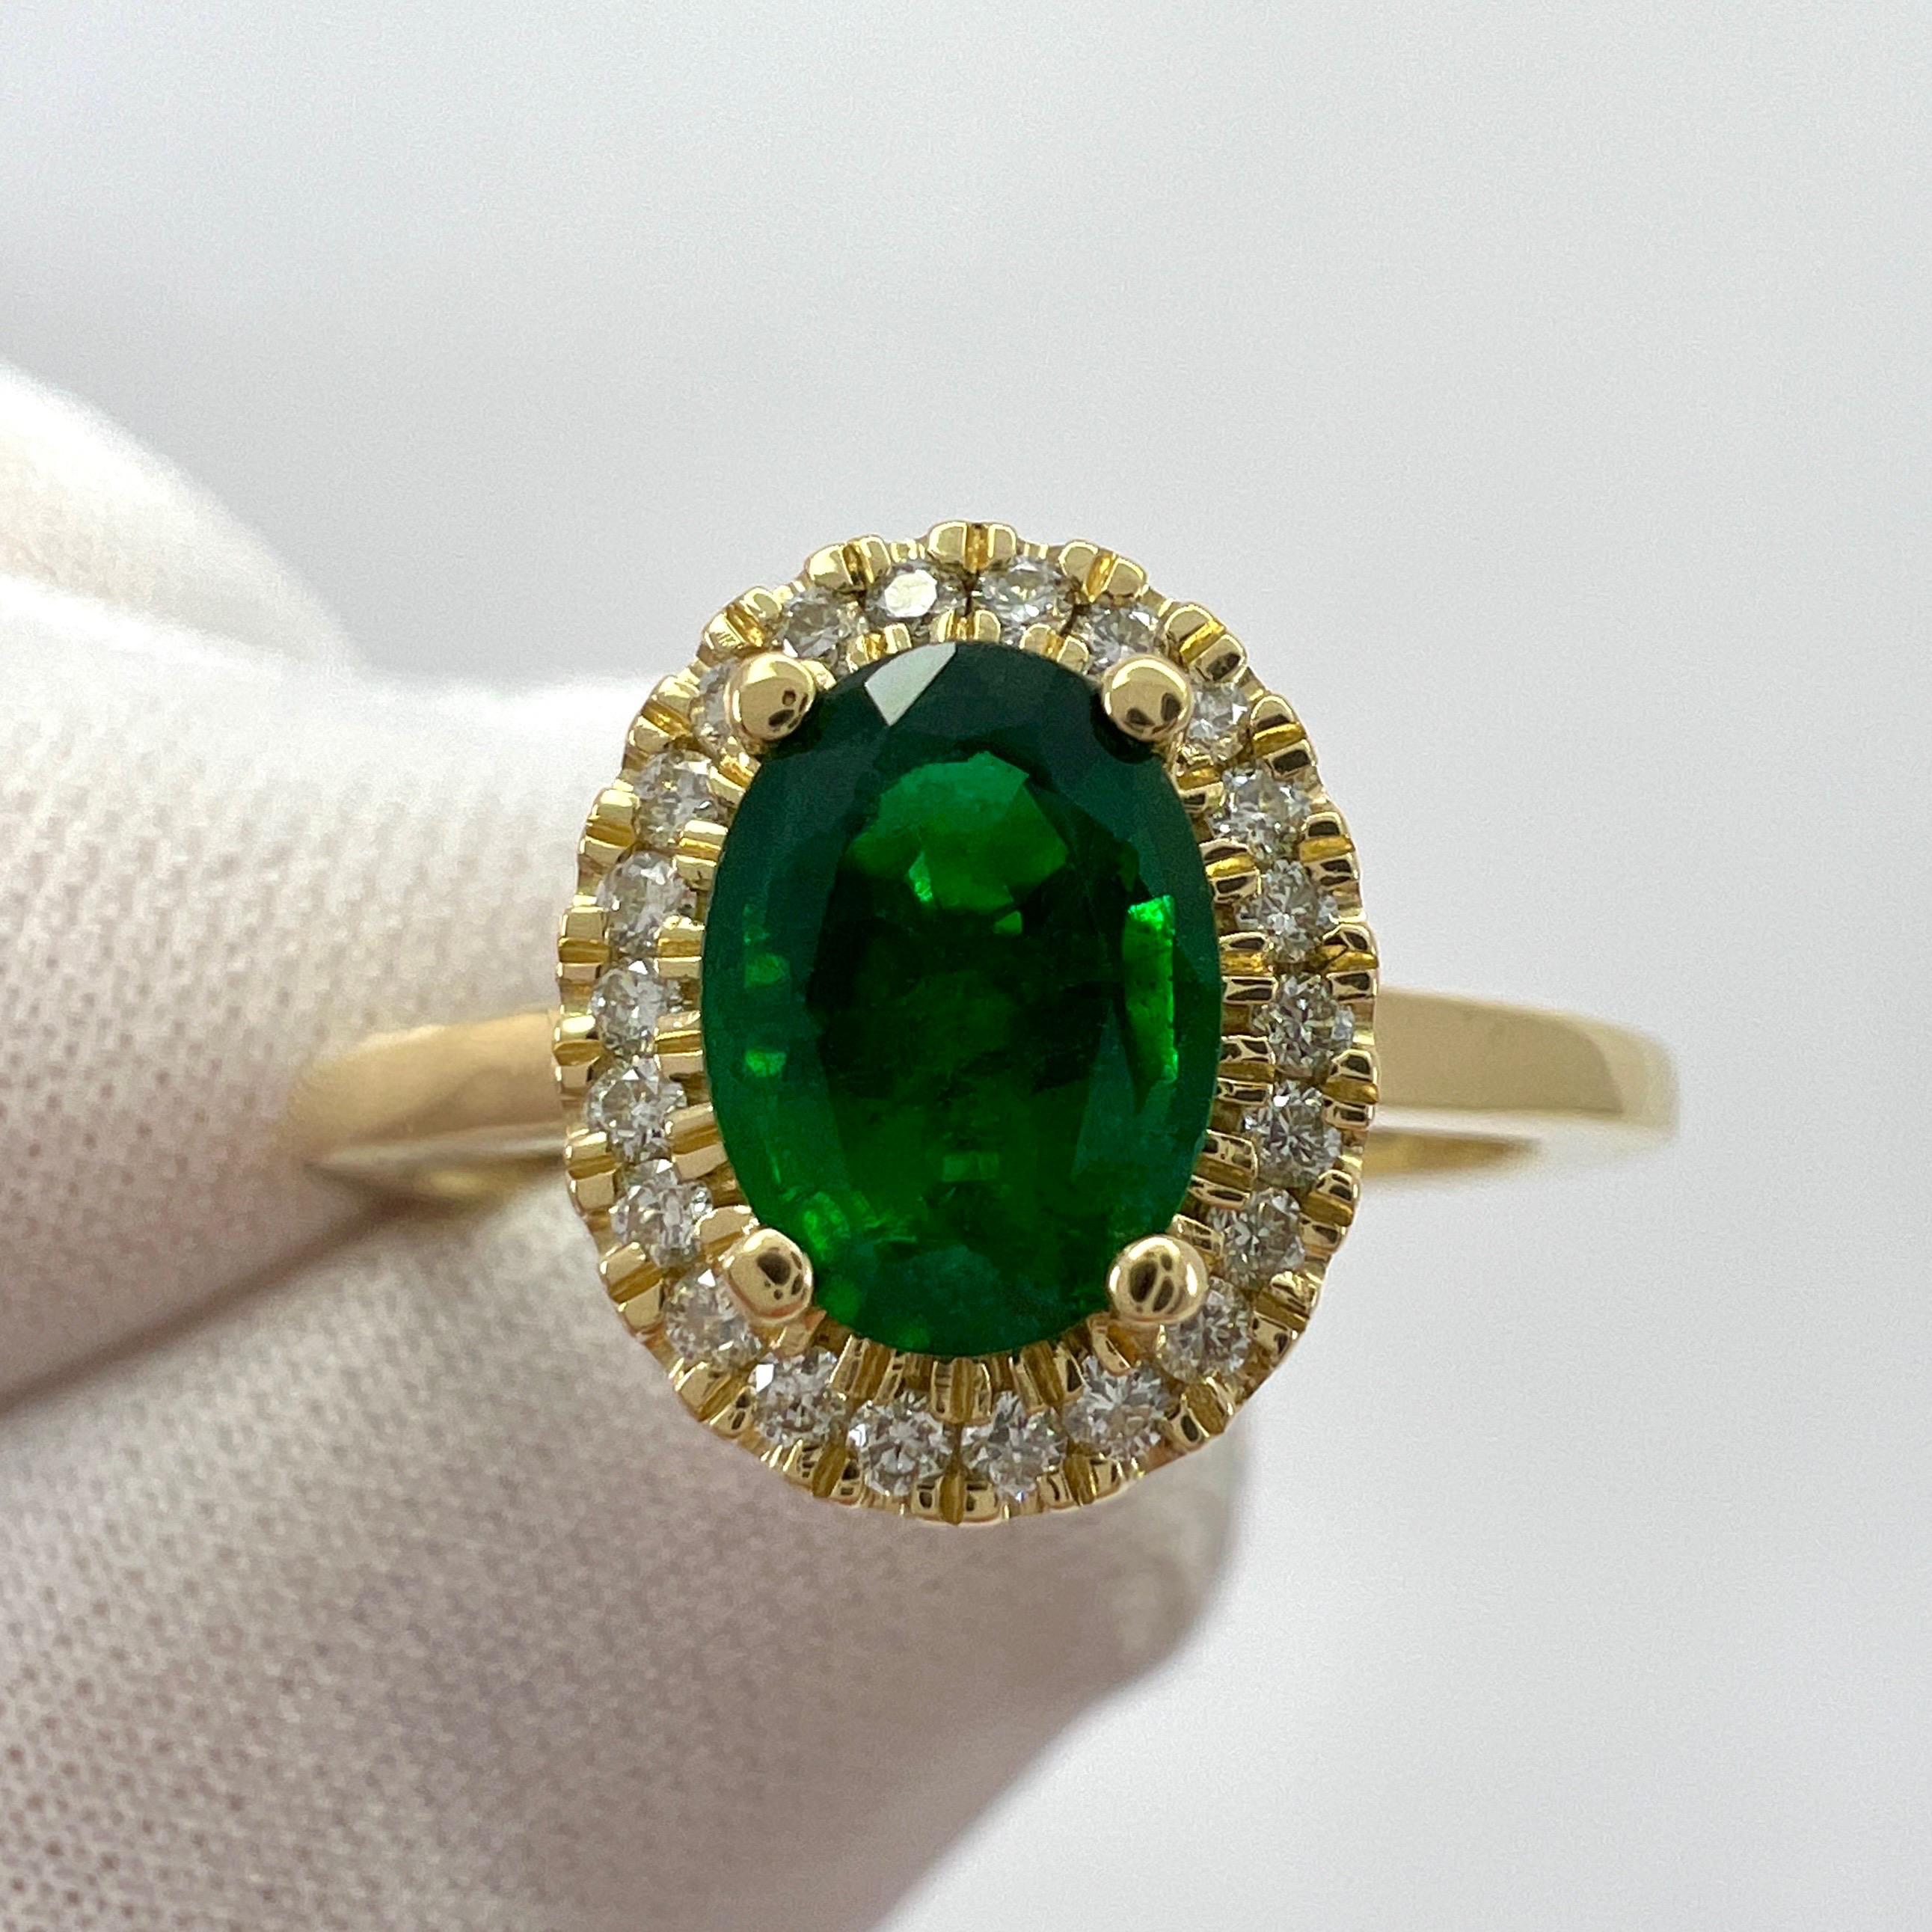 Fine GIA Certified Deep Green Emerald And Diamond 18k Yellow Gold Halo Ring.

Fine 0.78 carat 7x5mm oval cut emerald with a top grade, intense green colour and very good clarity.
This stone has some small natural inclusions visible when looking